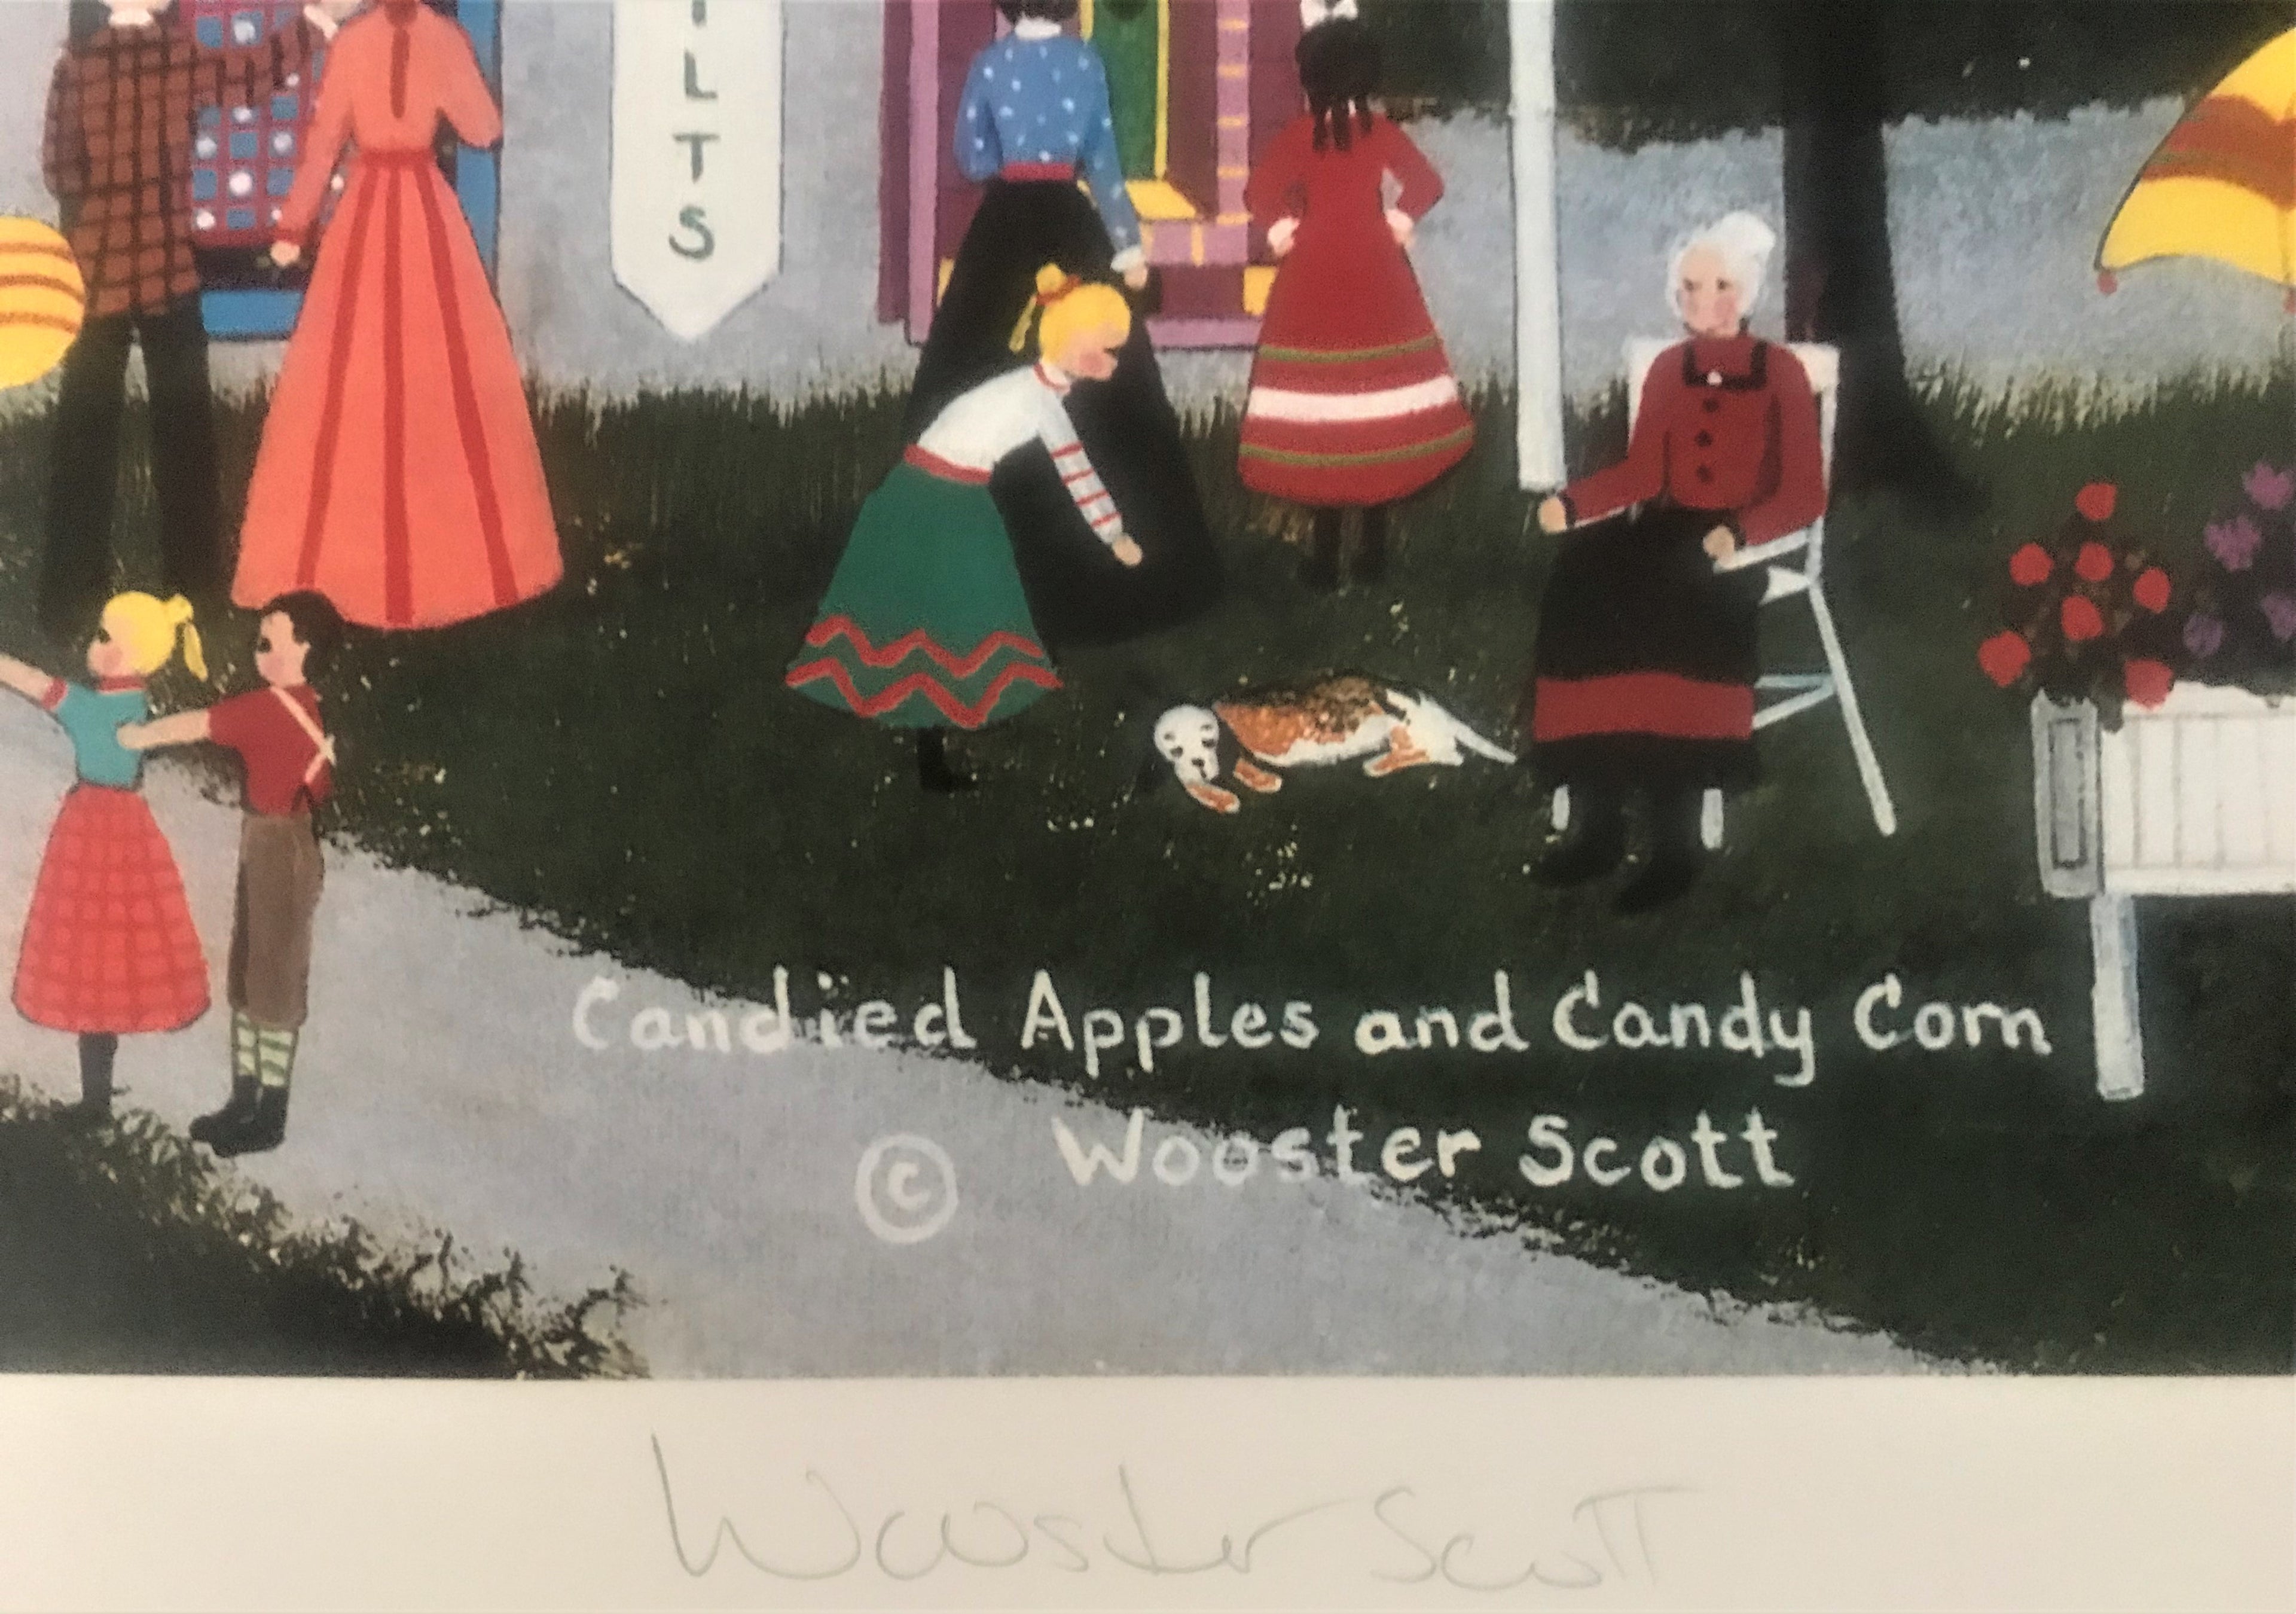 Candied Apples &amp; Candied Corn Jane Wooster Scott Lithograph Print Artist Hand Signed and Numbered